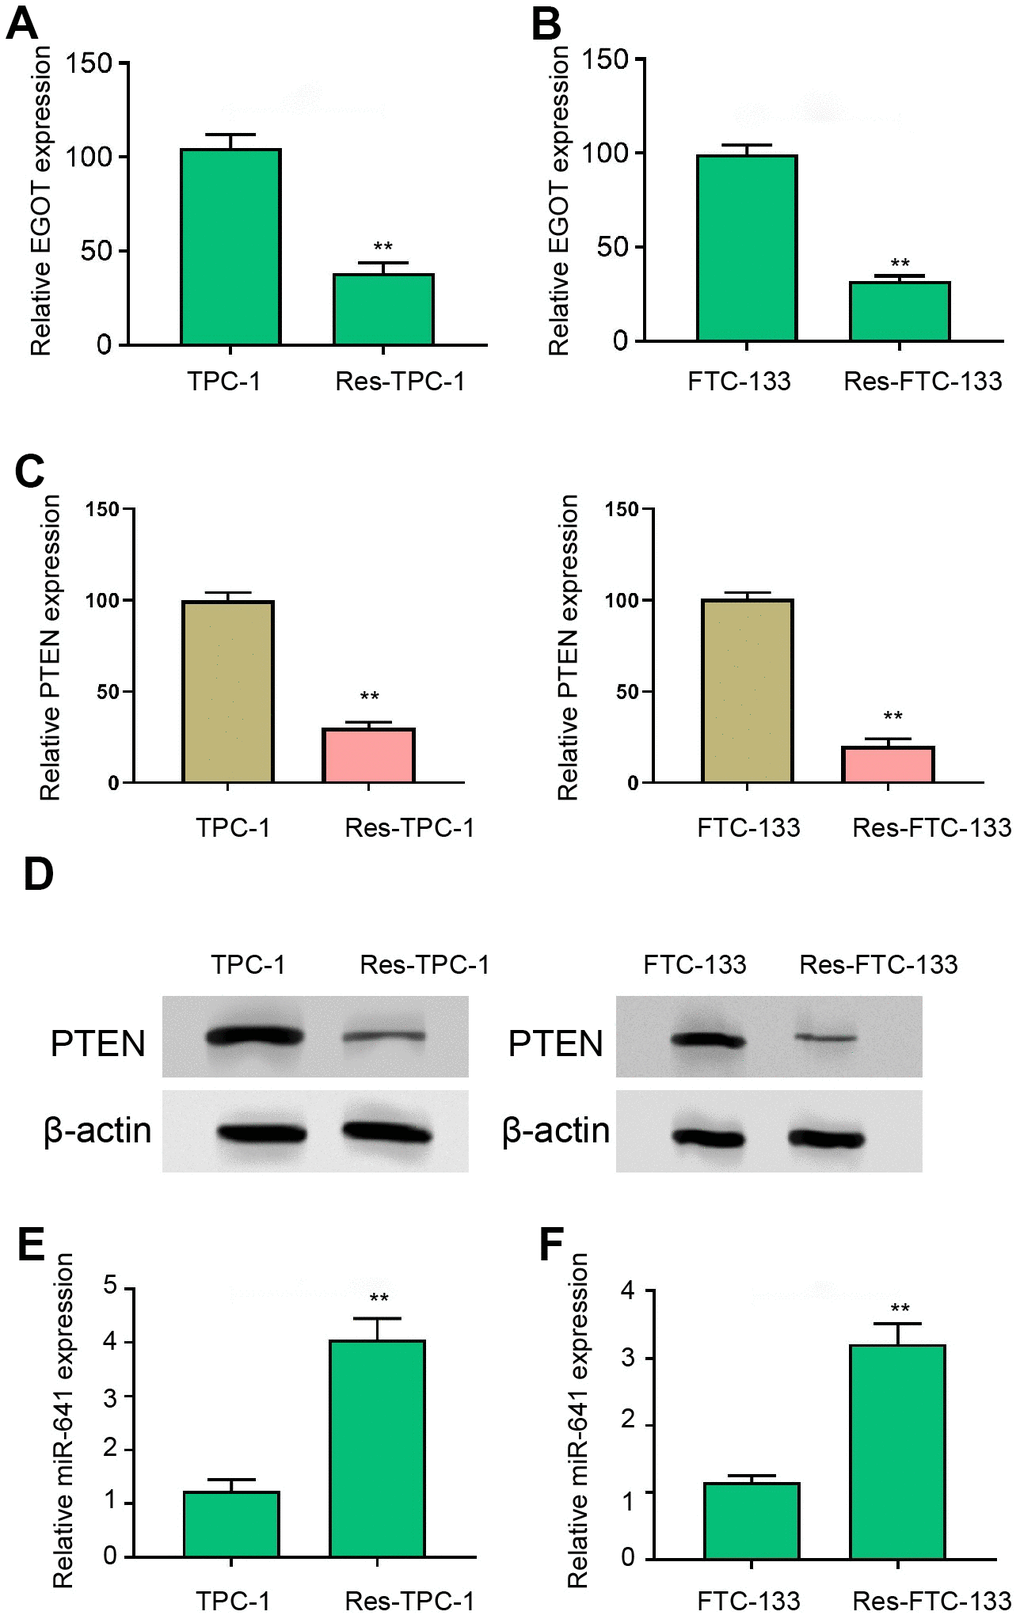 EGOT and PTEN expression is decreased and miR-641 expression is increased in 131I-resistant TC cells. (A, B) The qPCR analysis of EGOT in 131I -resistant TPC-1 and FTC-133 cells. (C) The qPCR analysis of PTEN in 131I -resistant TPC-1 and FTC-133 cells. (D) The Western blot analysis of PTEN in 131I -resistant TPC-1 and FTC-133 cells. (E, F) The qPCR analysis of miR-641 in 131I -resistant TPC-1 and FTC-133 cells. mean ± SD, ** P 